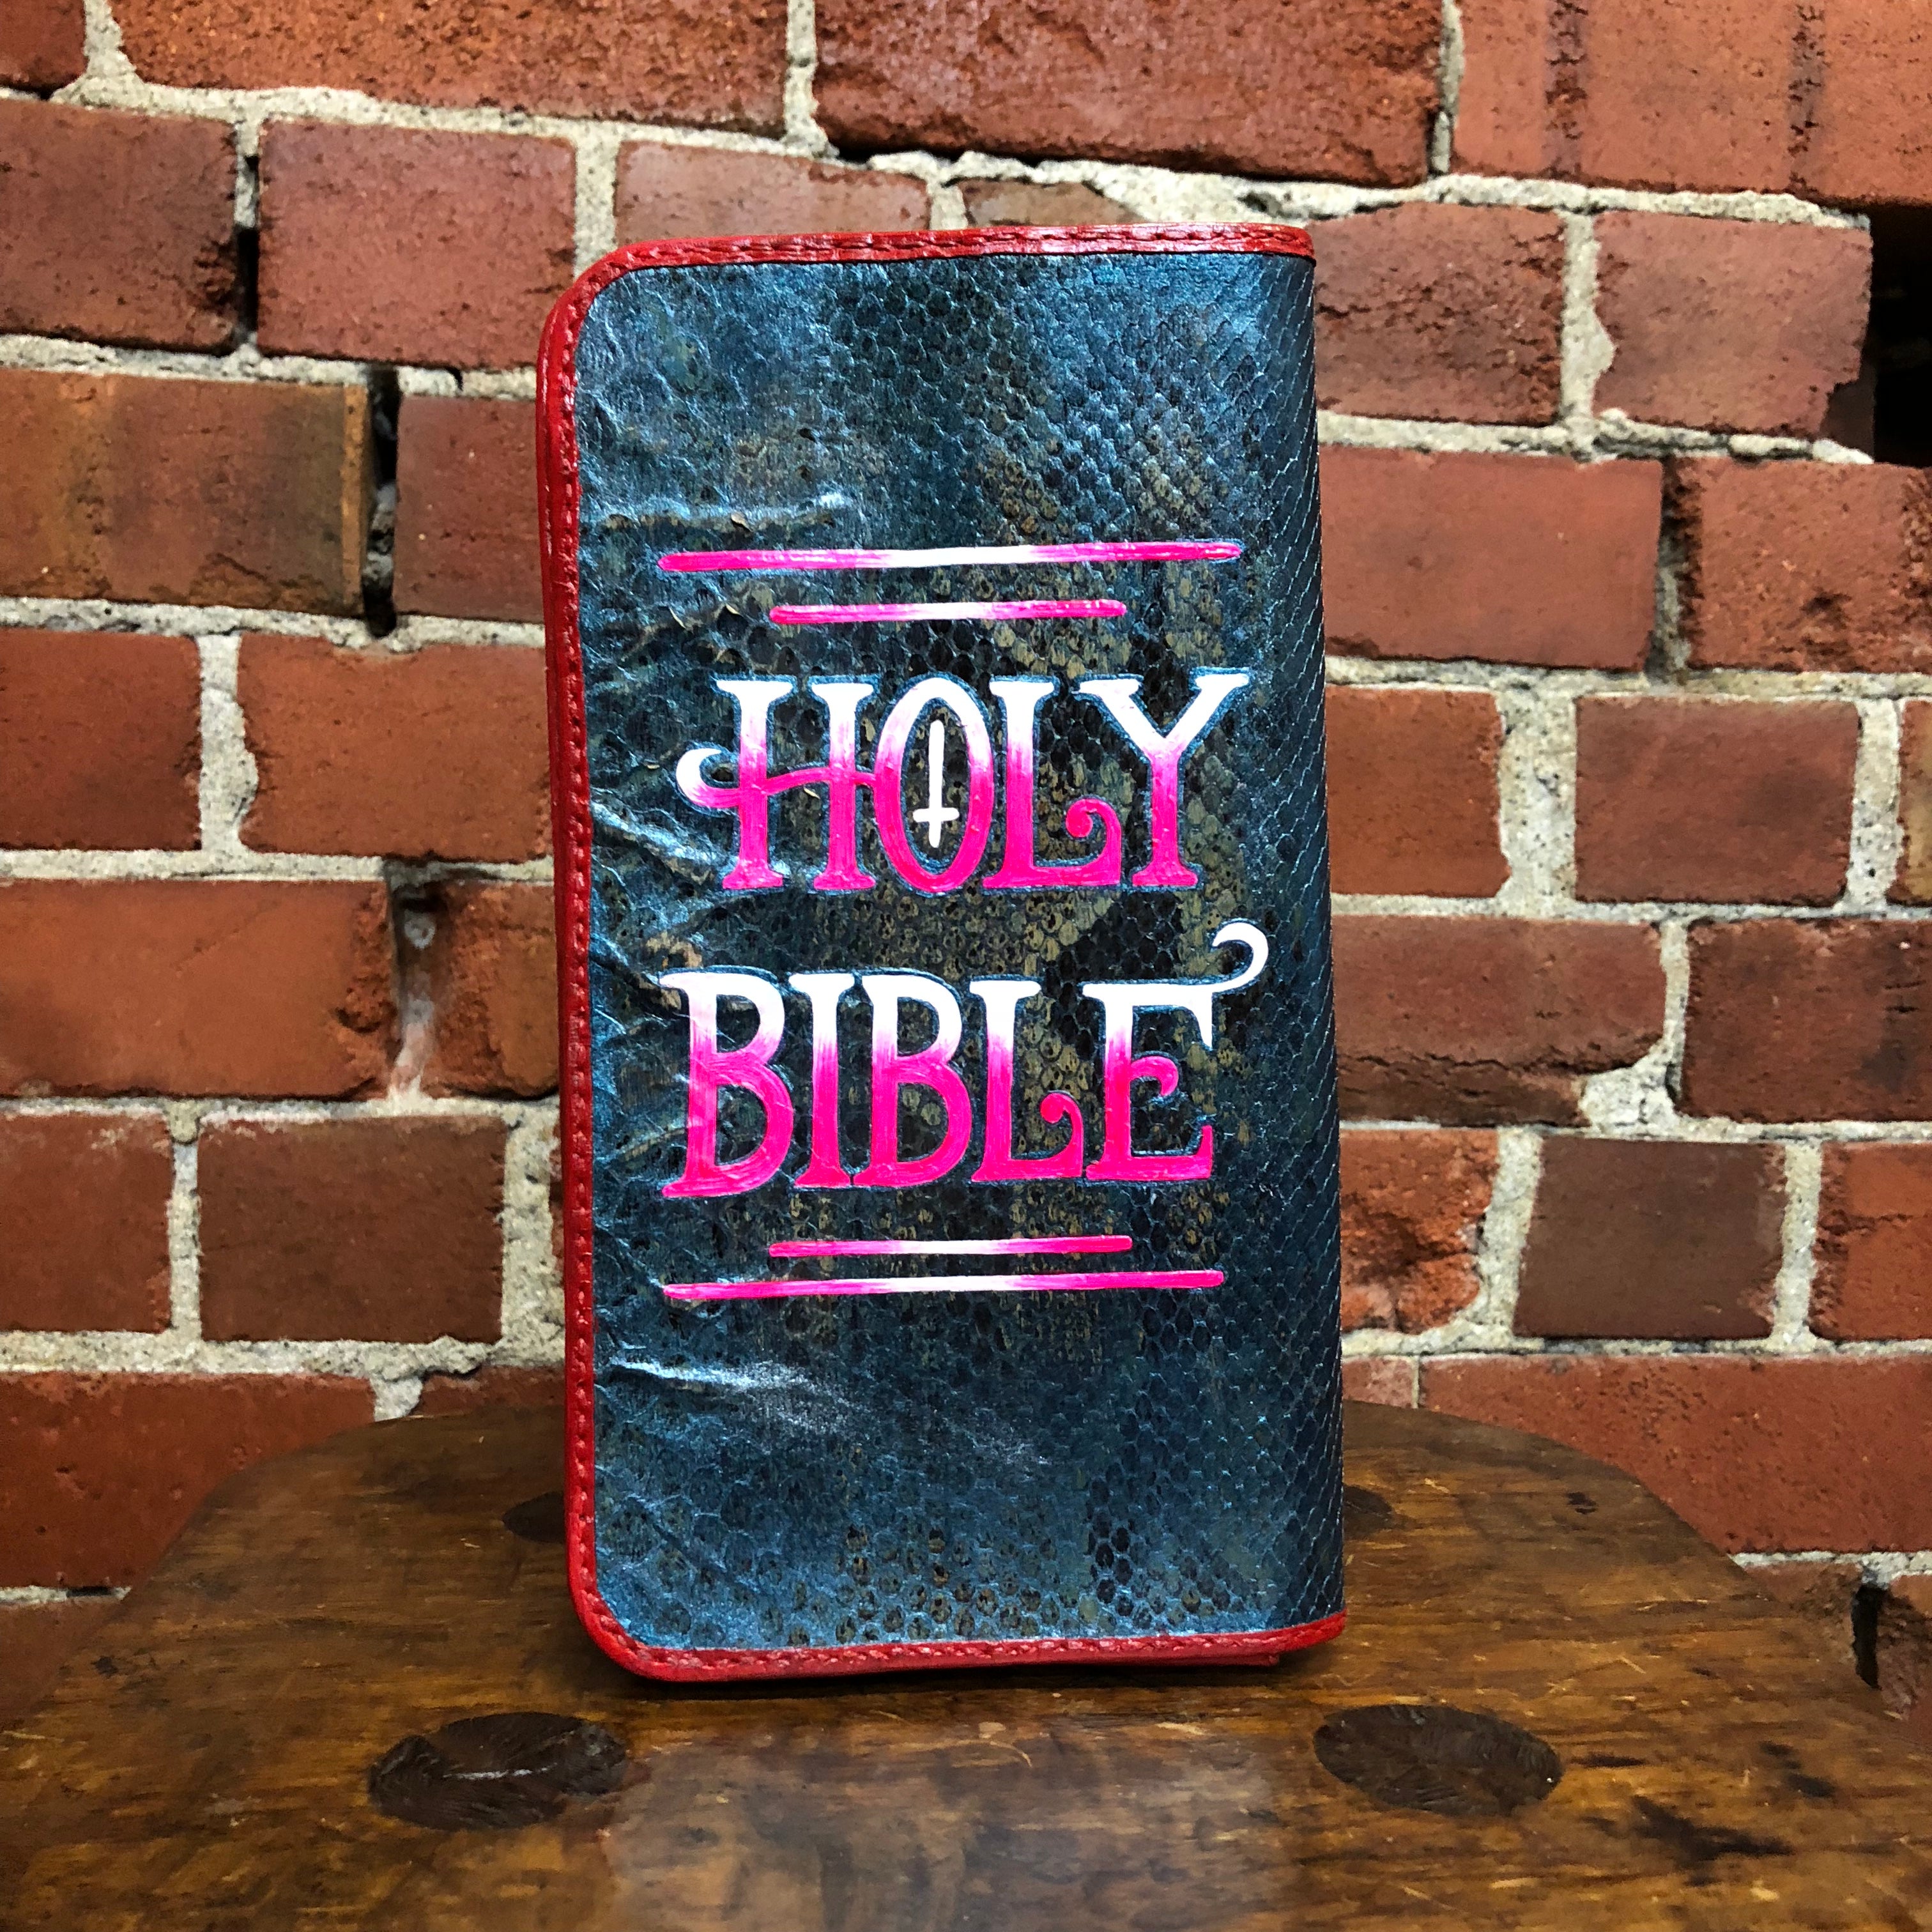 XOE HALL hand painted snakeskin bible clutch!